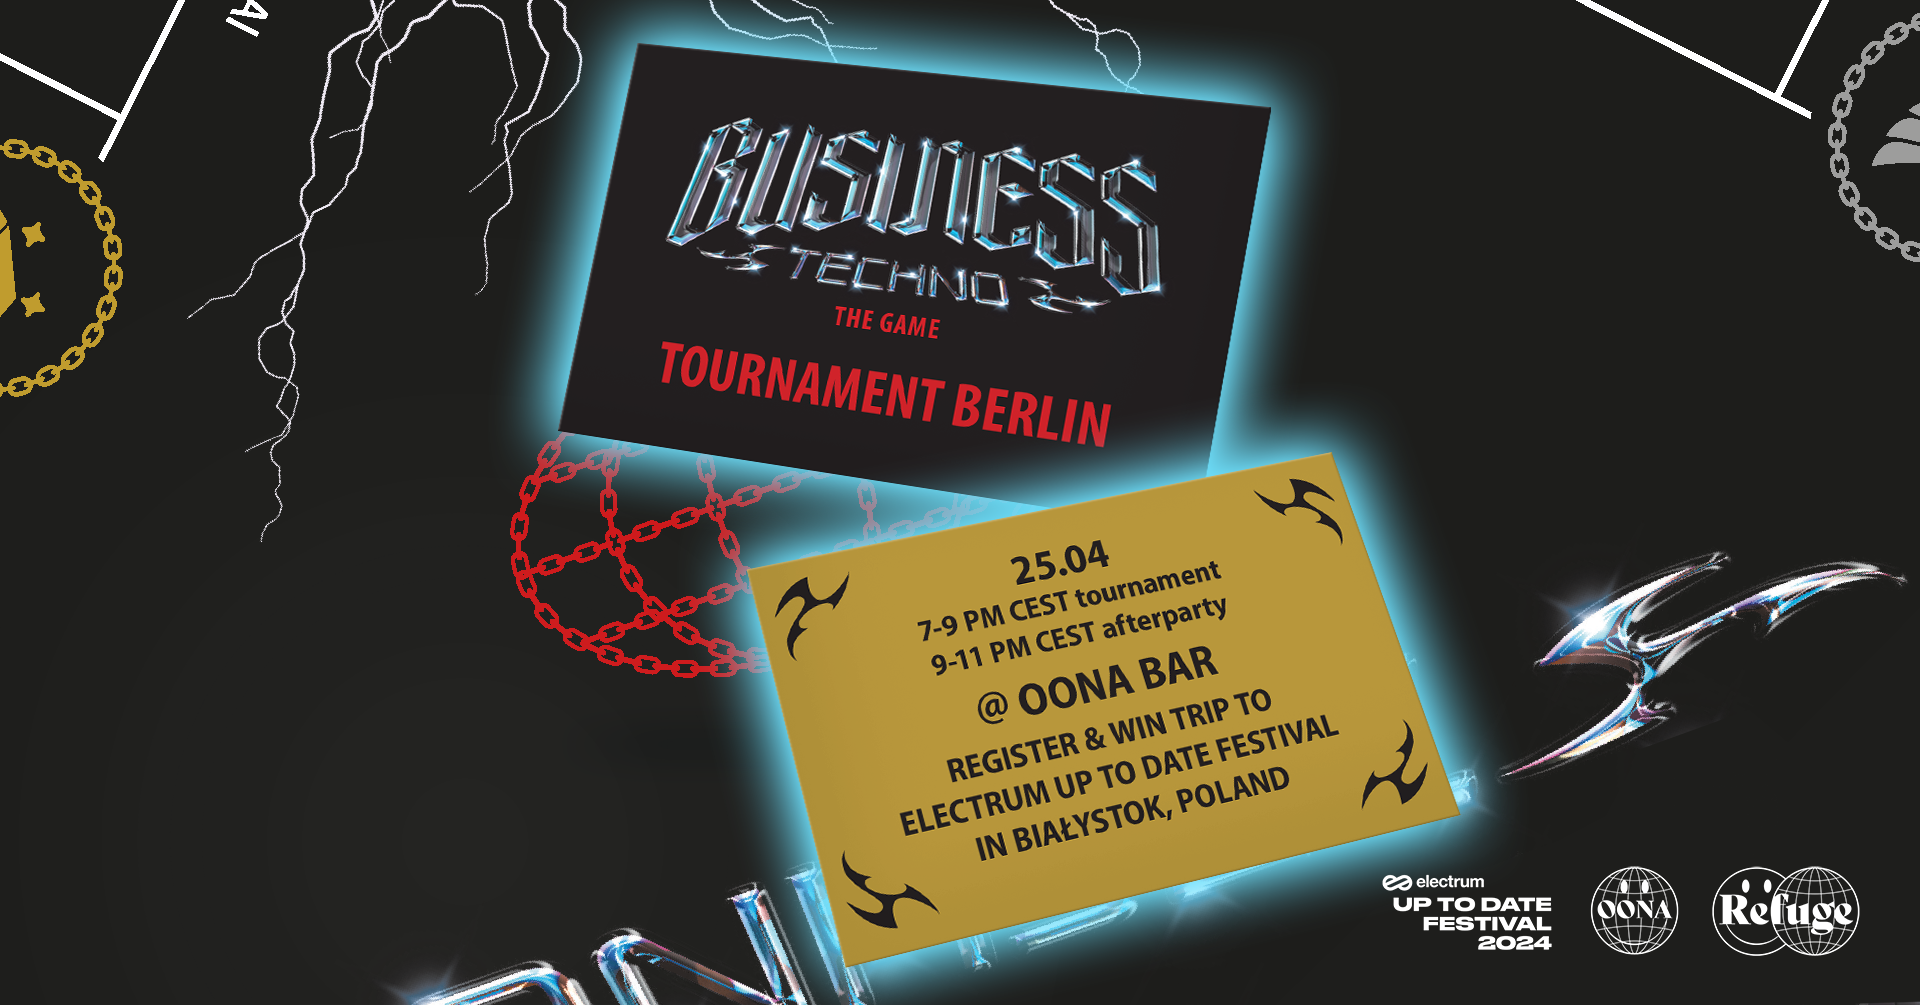 Business Techno: The Game Tournament - Página frontal